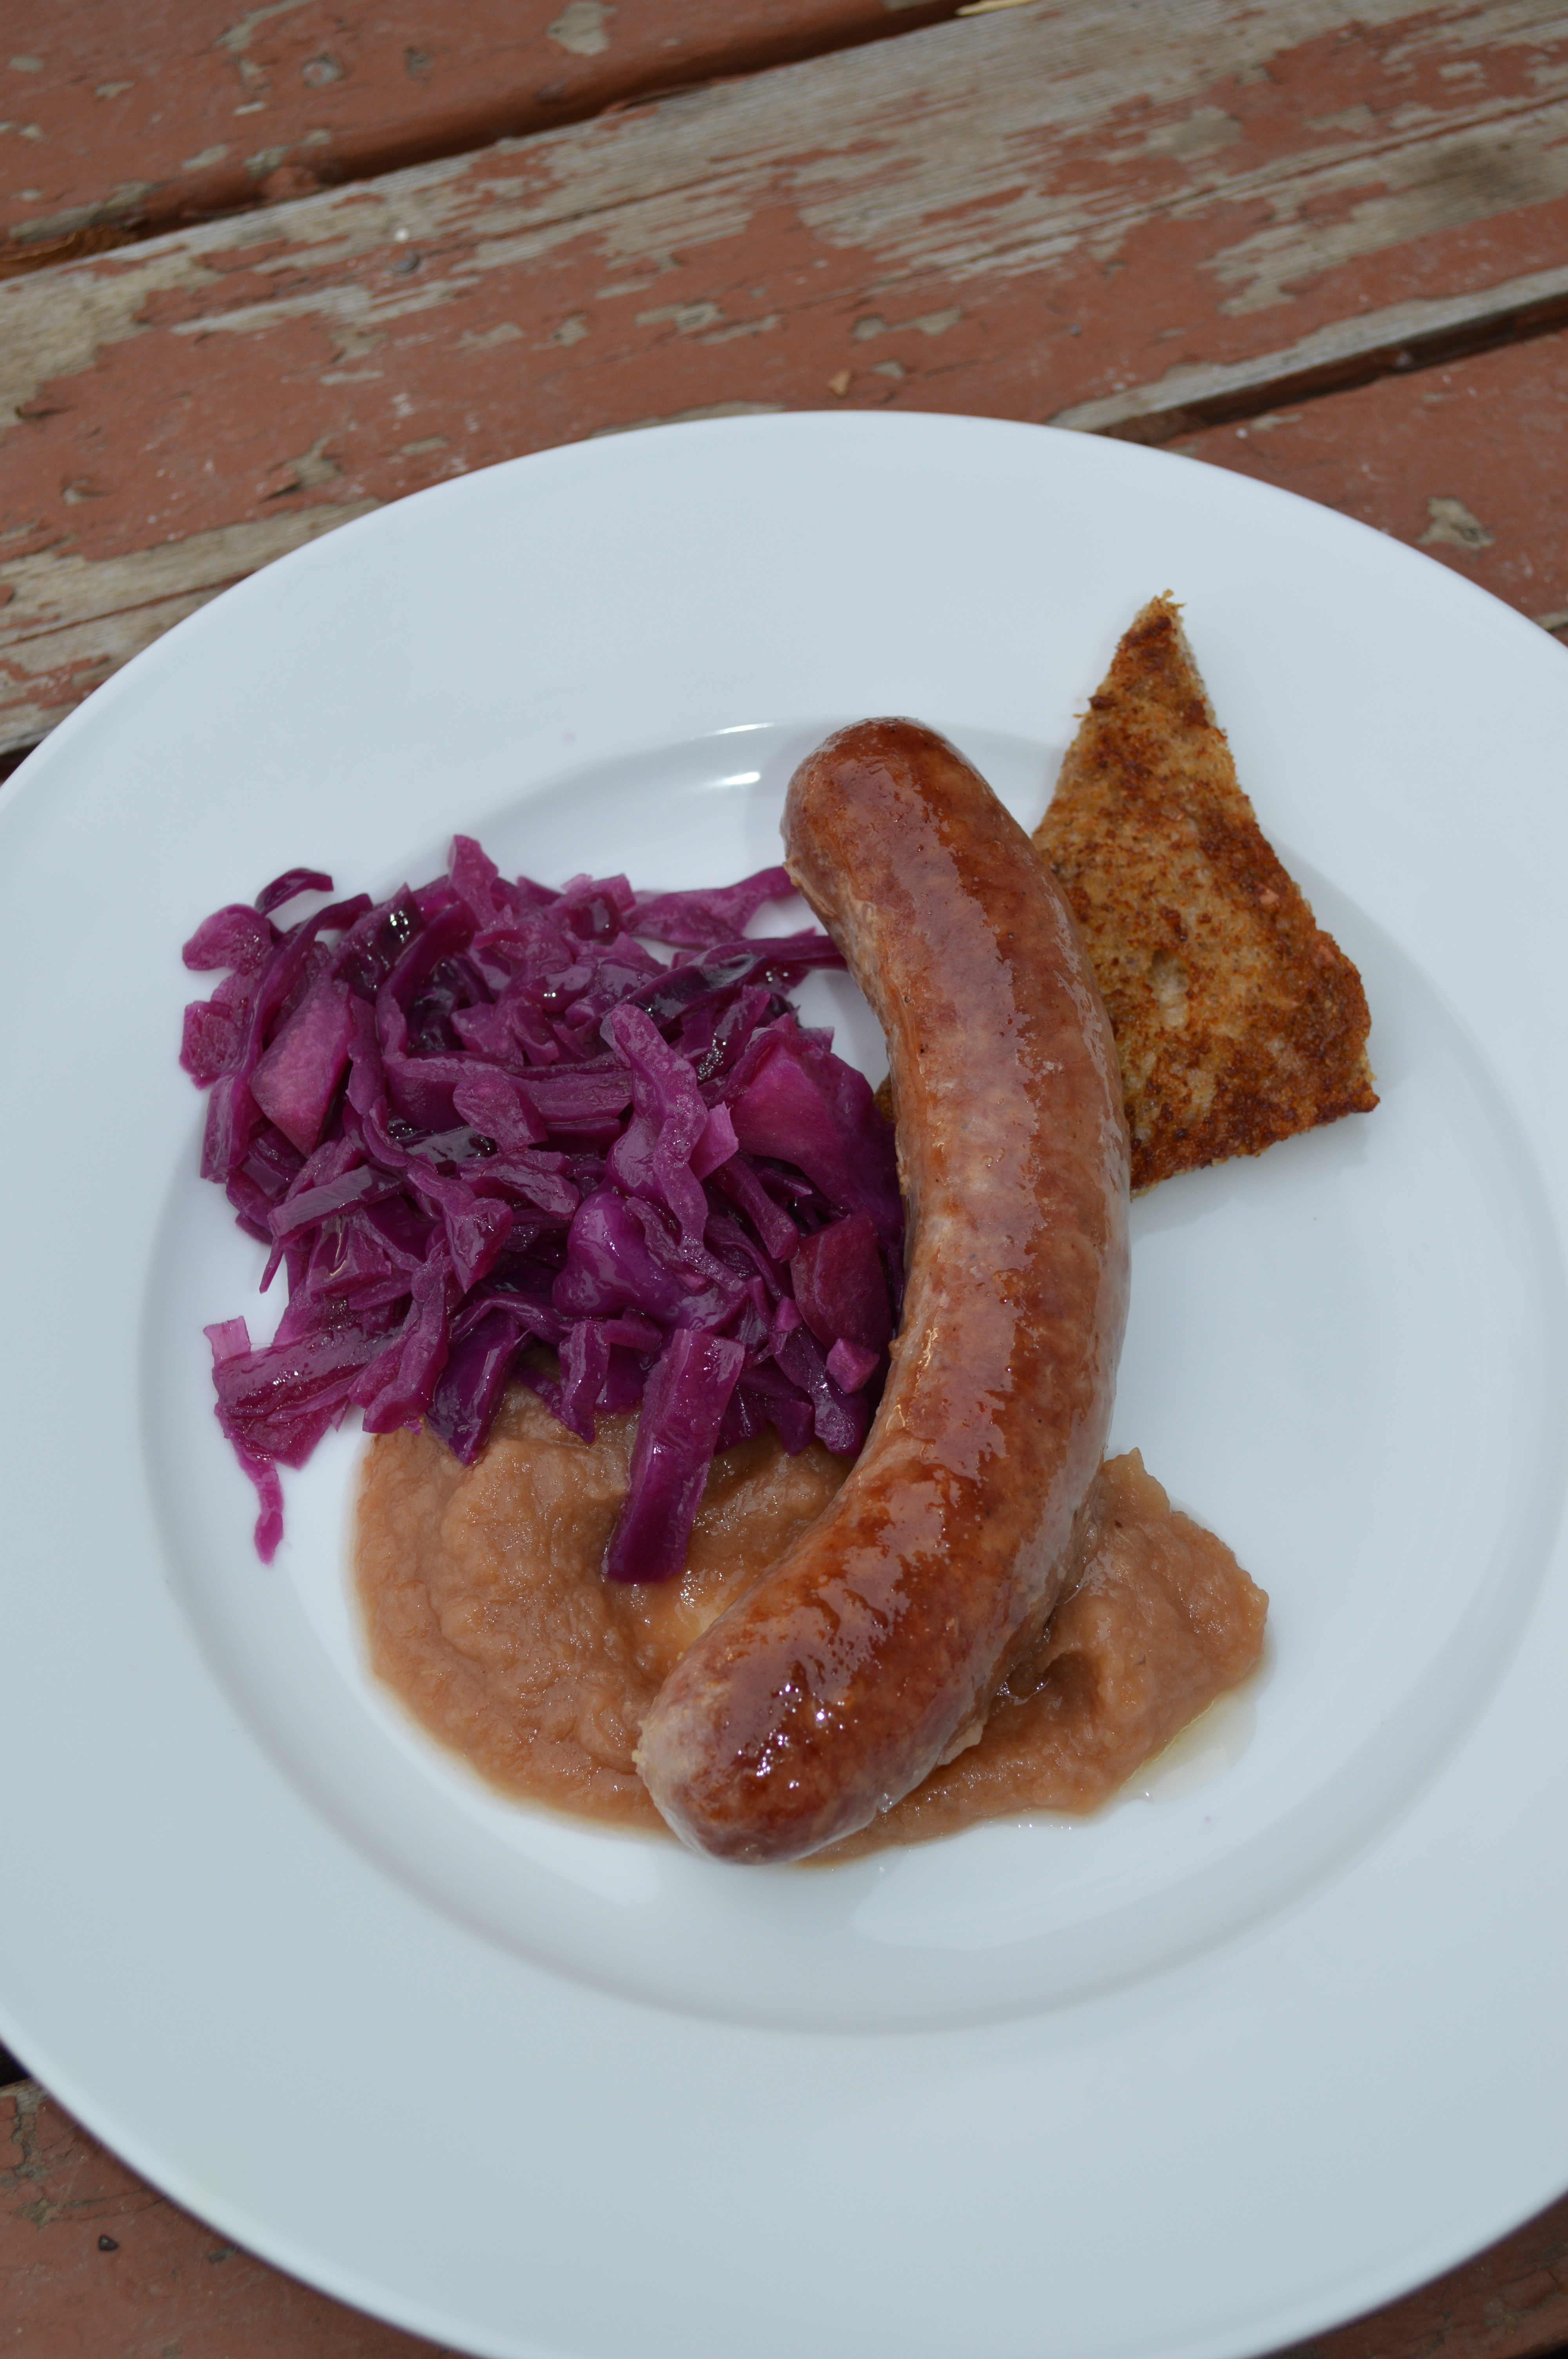 A plate of sausage, toast, apple sauce, and braised red cabbage.